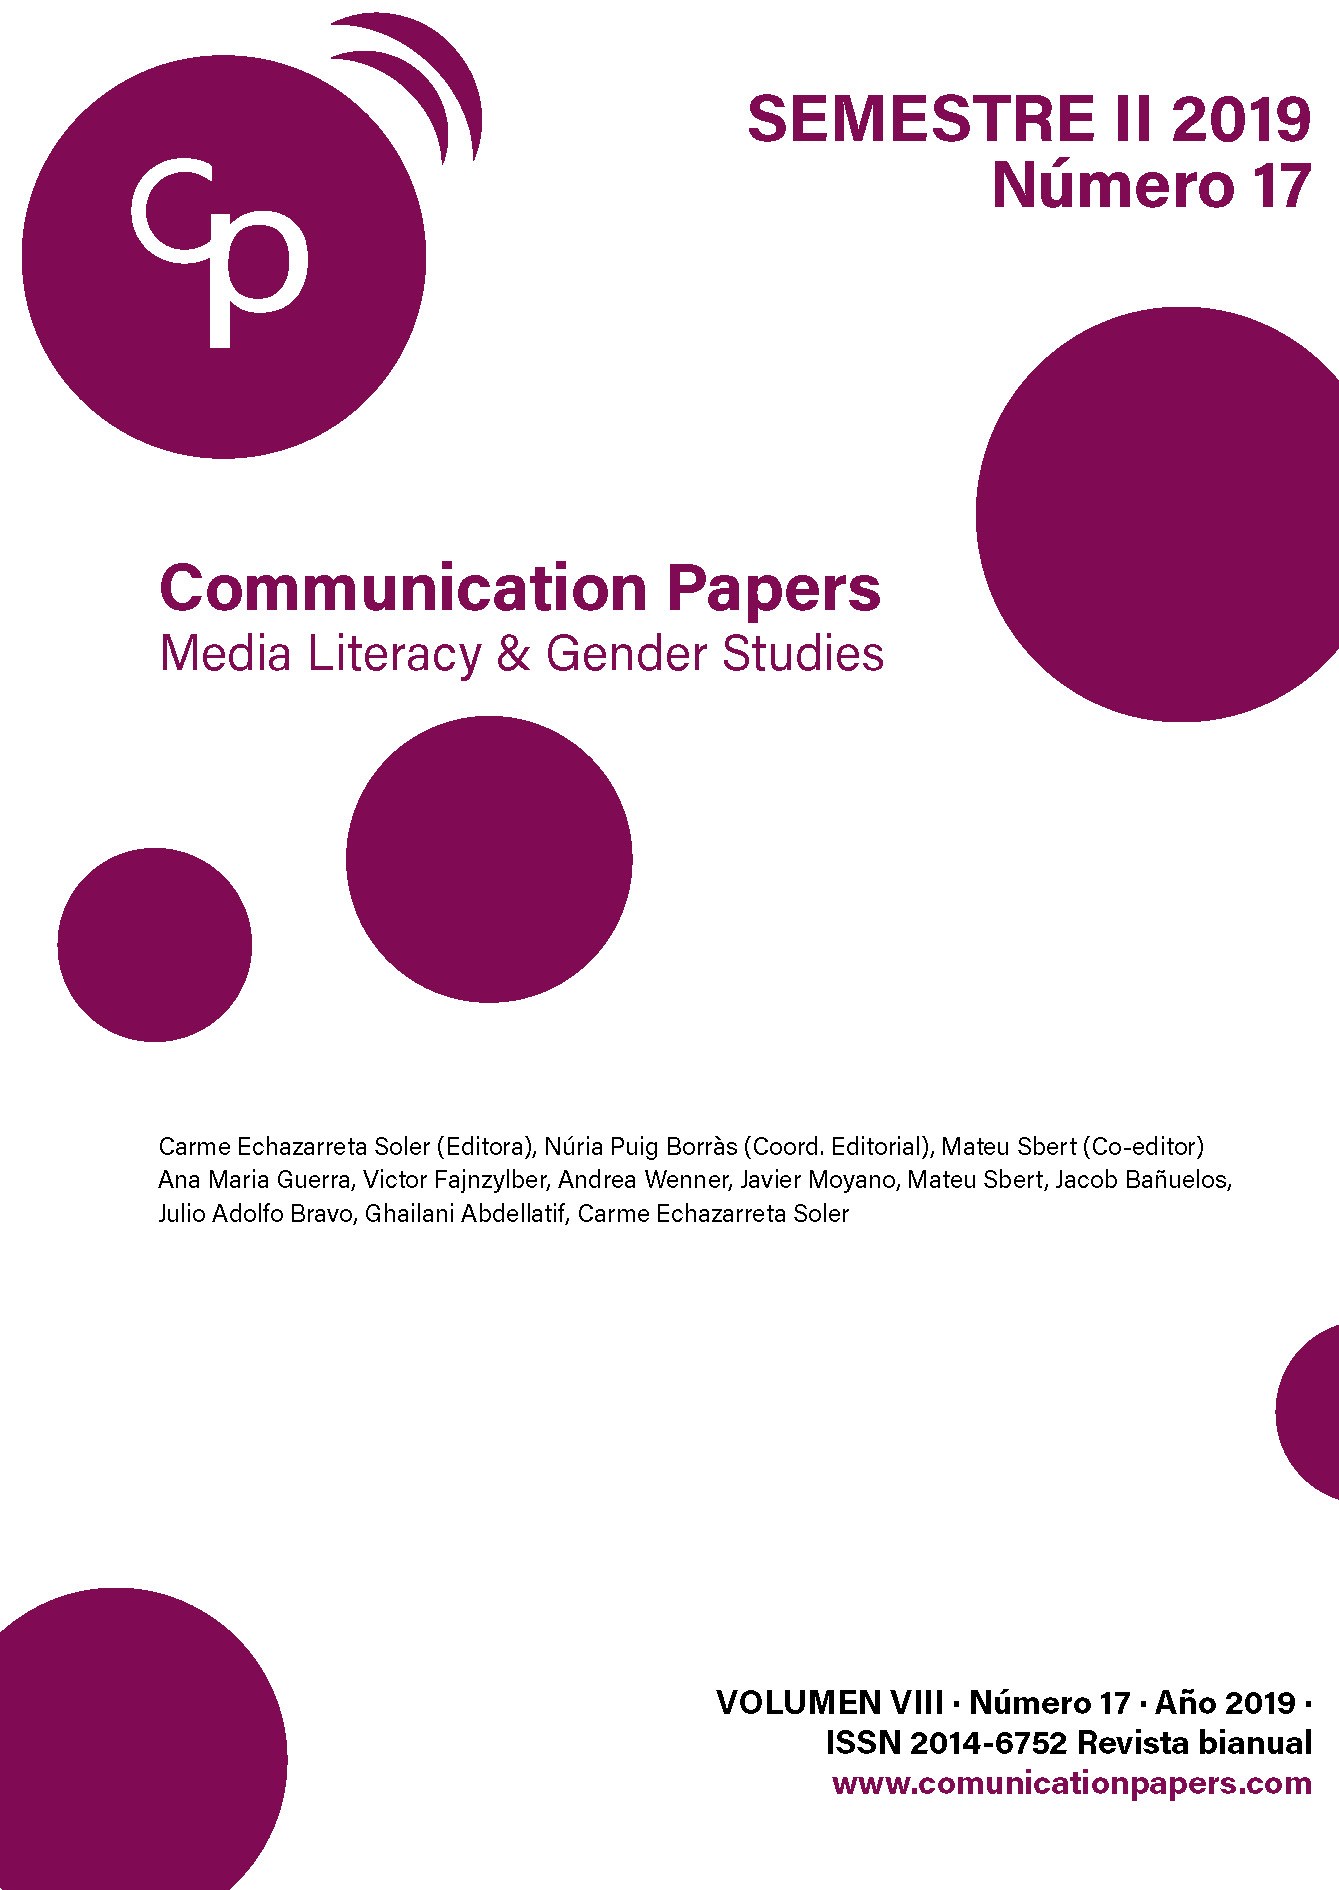 Communication Papers n.17